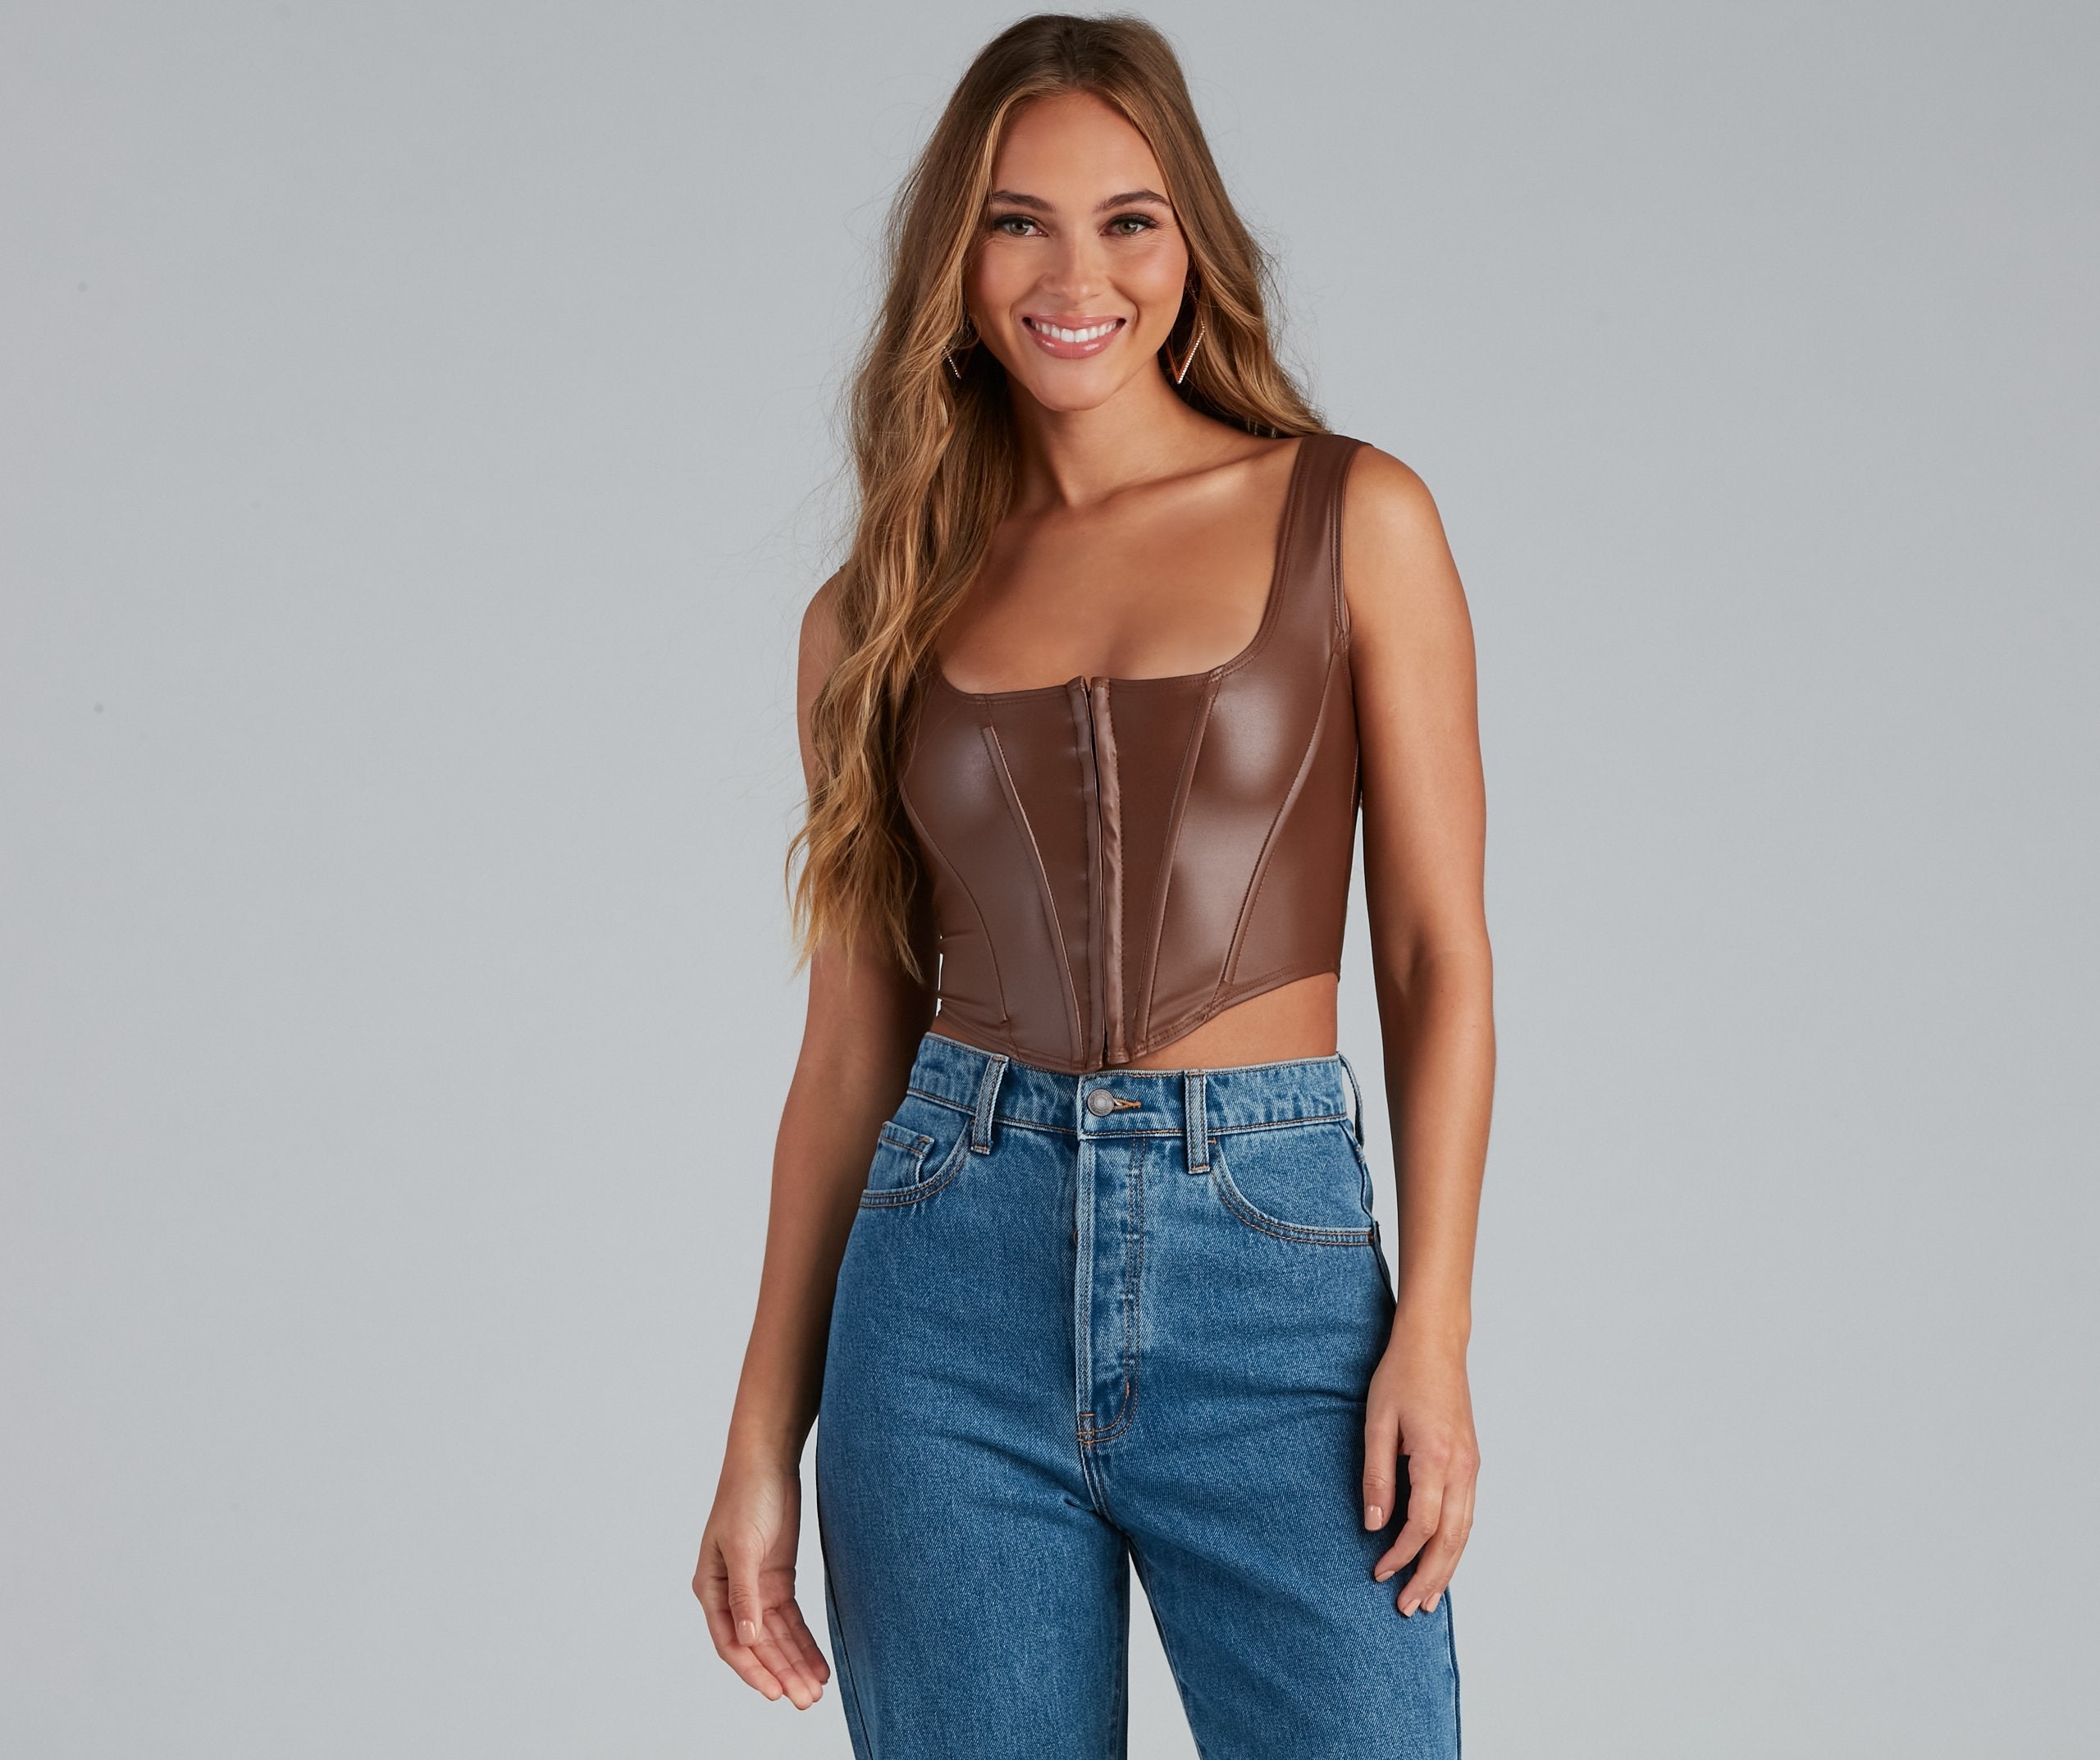 Cute Corset Faux Leather Crop Top - Lady Occasions